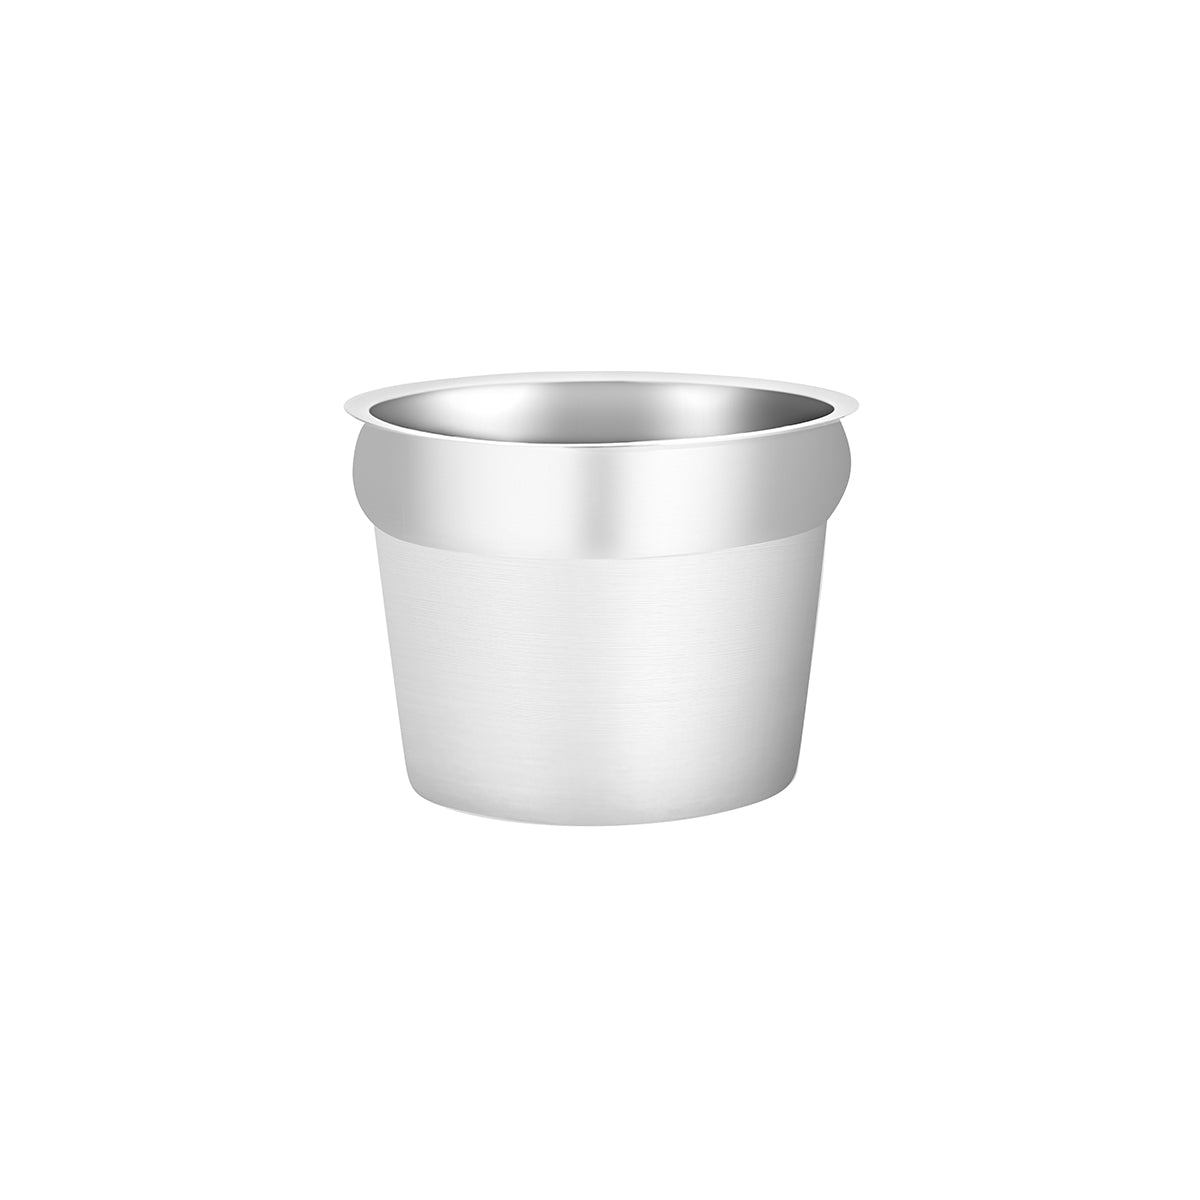 54919-I Chef Inox Soup Pan Insert Round Stainless Steel to Suit 54919 Tomkin Australia Hospitality Supplies